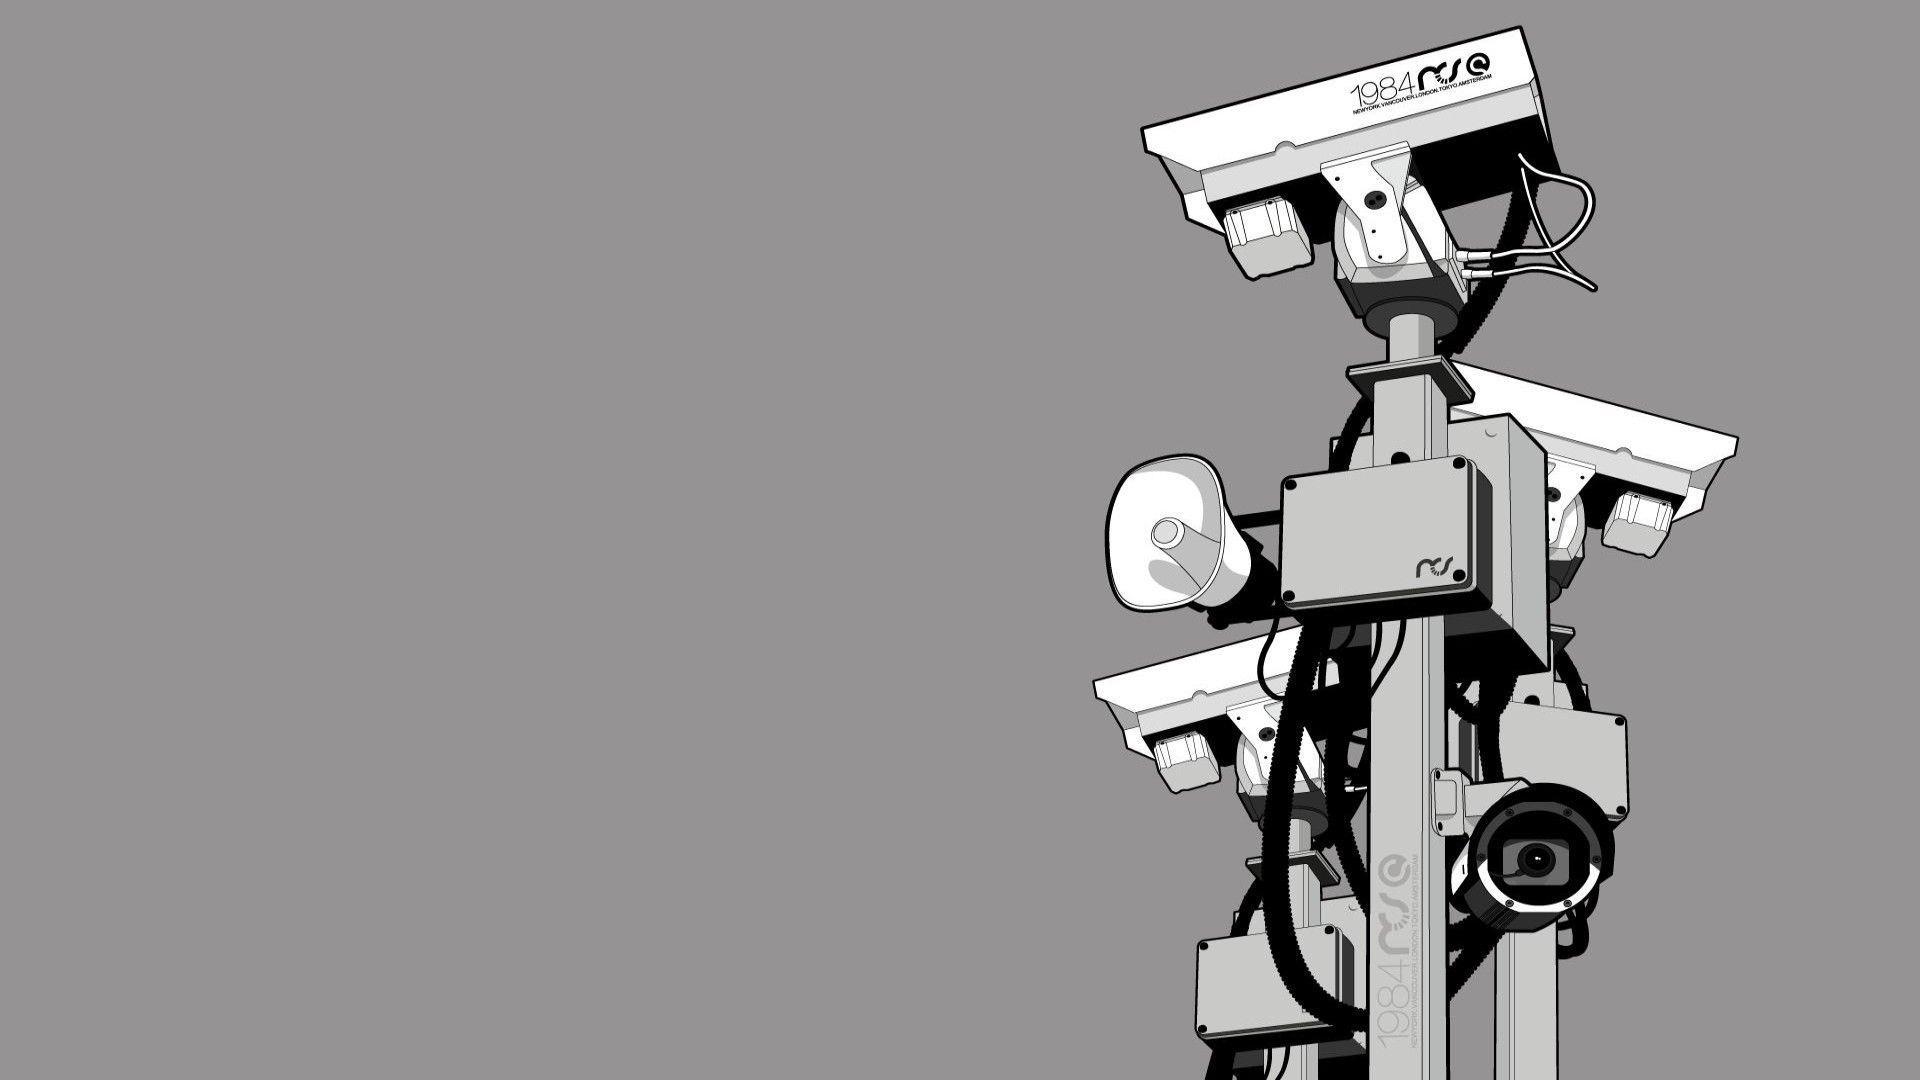 Security cameras, gray background wallpaper and image